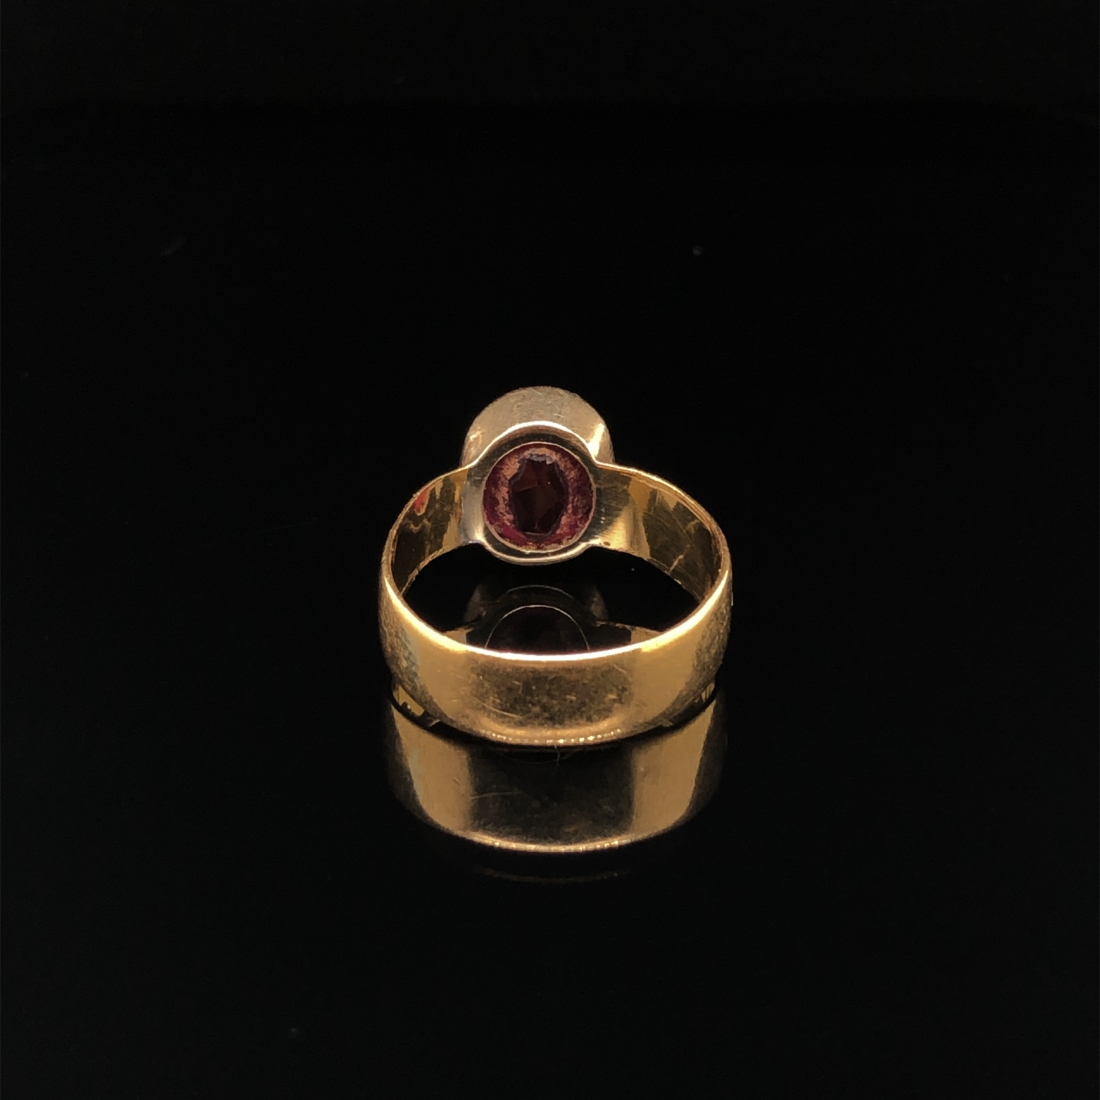 AN ANTIQUE 22ct HALLMARKED GOLD GEMSET RING, WITH A 10ct GOLD SETTING. DATED 1908, BIRMINGHAM. - Image 5 of 10